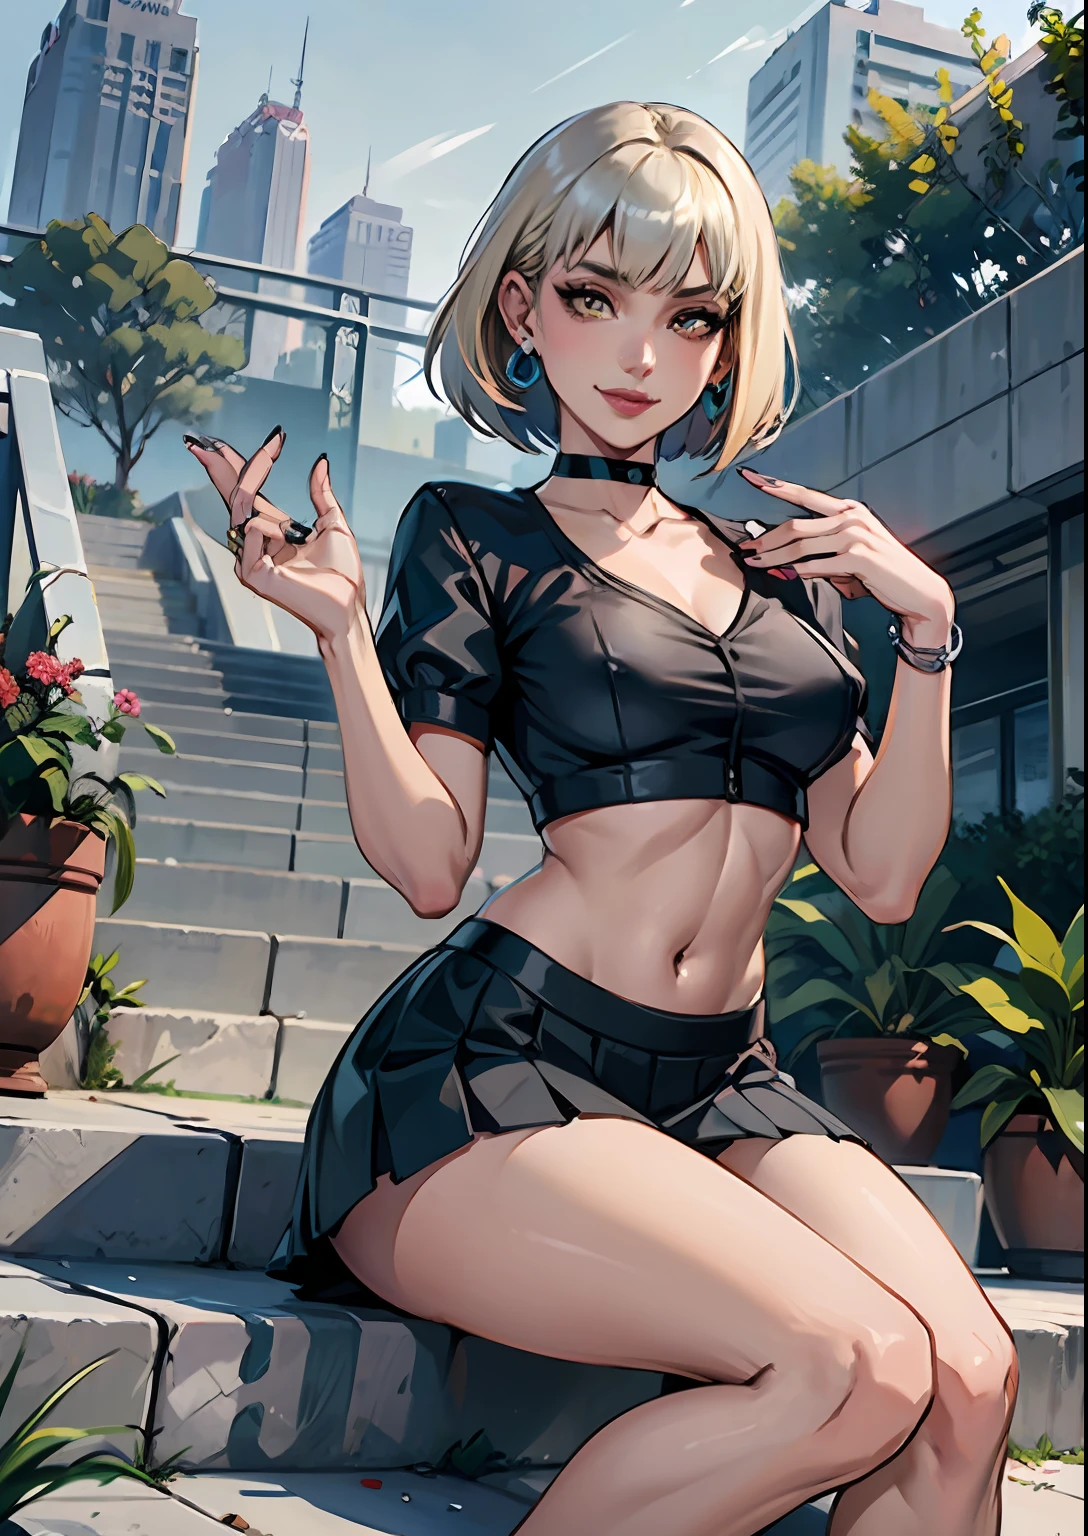 1girl, bangs, black_choker, blonde_hair, blue_skirt, bush, choker, collarbone, day, earrings, flower, jewelry, lips, looking_at_viewer, outdoors, plant, pleated_skirt, potted_plant, road,shirt, short_hair, short_sleeves, sitting, skirt, smile, solo, stairs,skimpy outfit,legs up,lewd pose,crop top(naval ring piercing)(bellybutton silver piercing)(yellow blonde hair)(blonde loose hair)(small perky boobs)